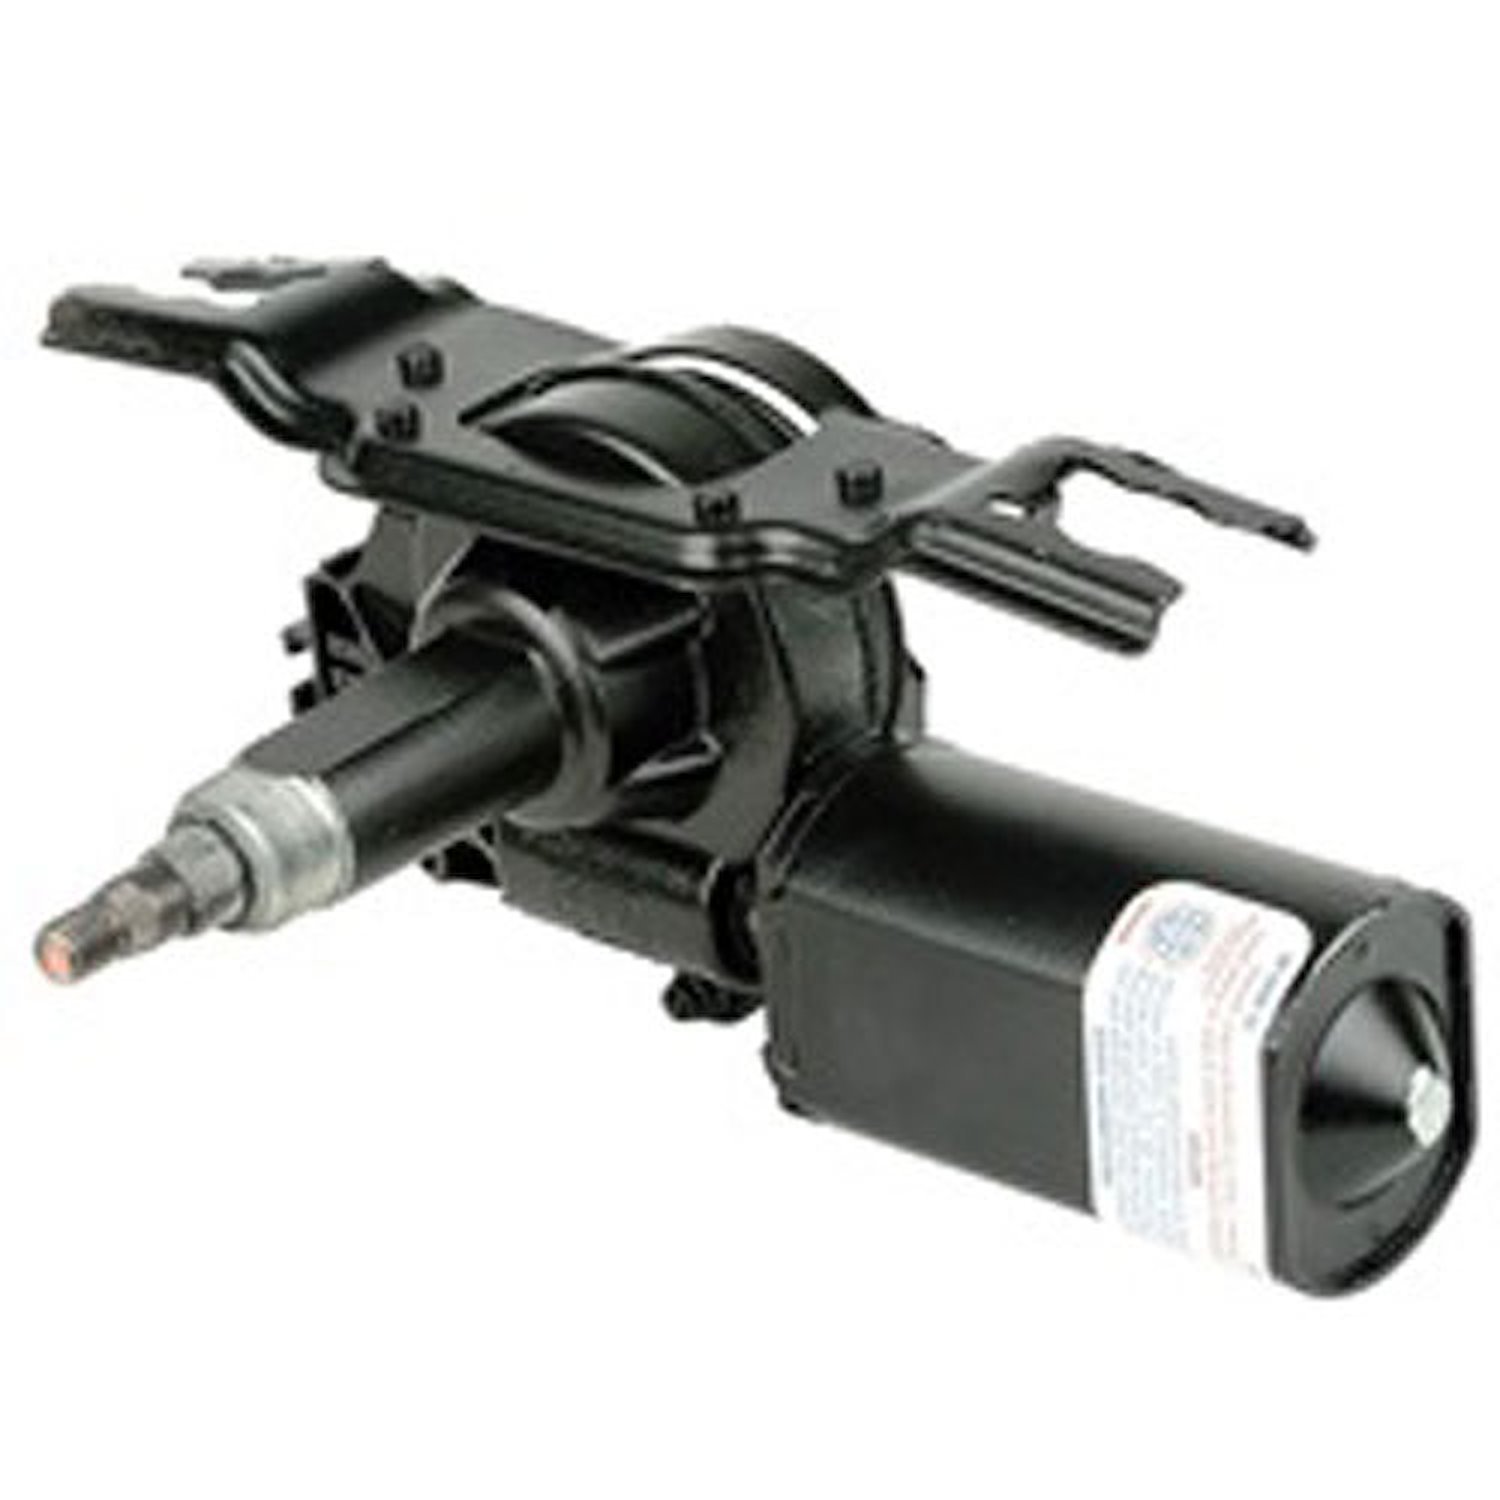 This rear wiper motor from Omix-ADA fits 02-07 Jeep Libertys and 99-04 Grand Cherokees.